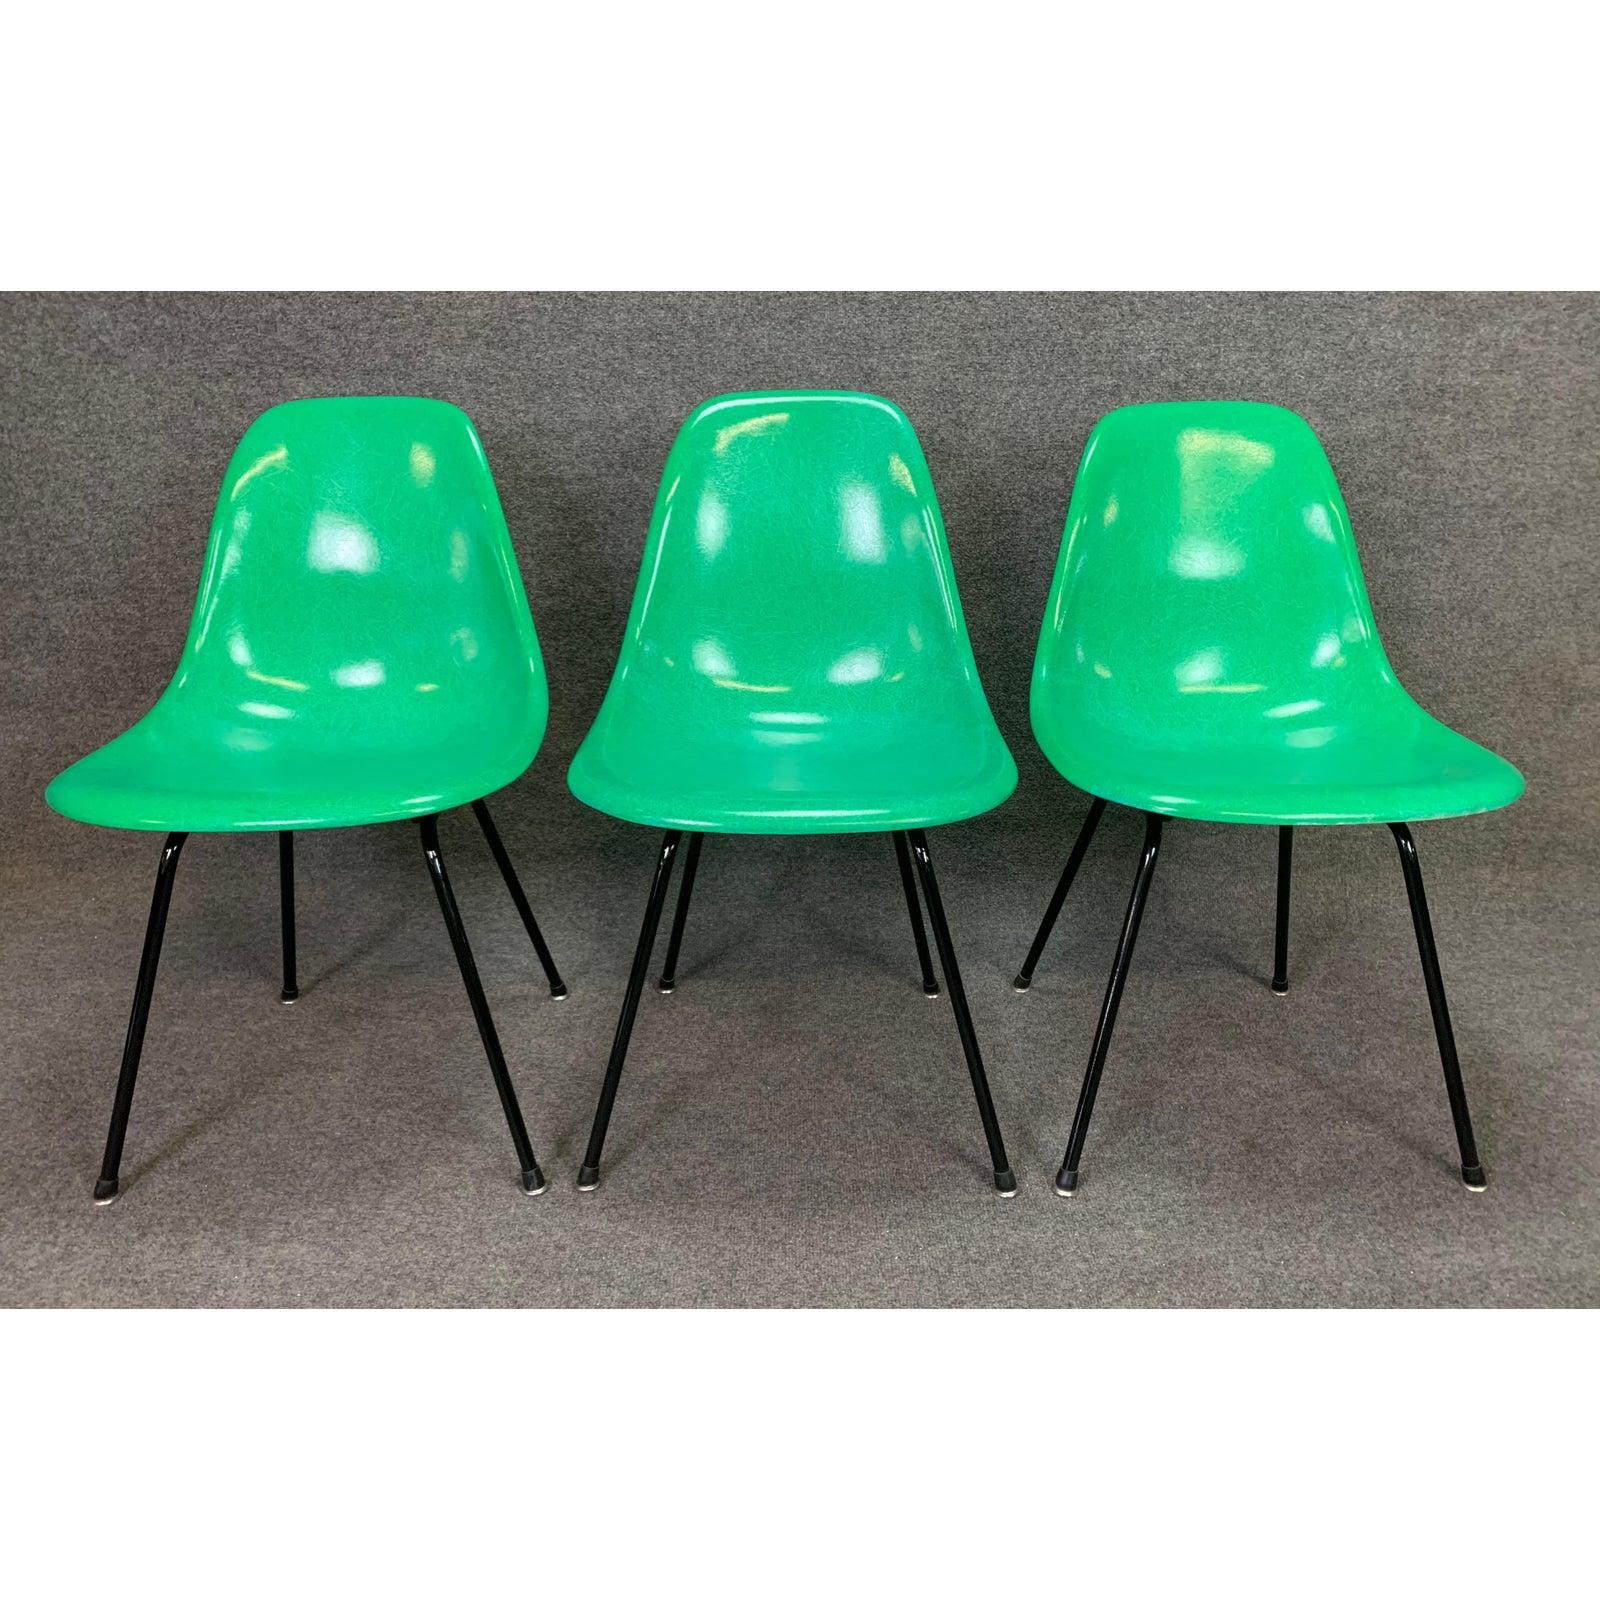 Here is a Classic set of six MCM fiberglass chairs in Kelly green model DSX designed by Charles Eames in 1948 and manufactured by Herman Miller in the 1960s in the USA.
Each shell has been striped of its worn finish, cleaned up and finished with